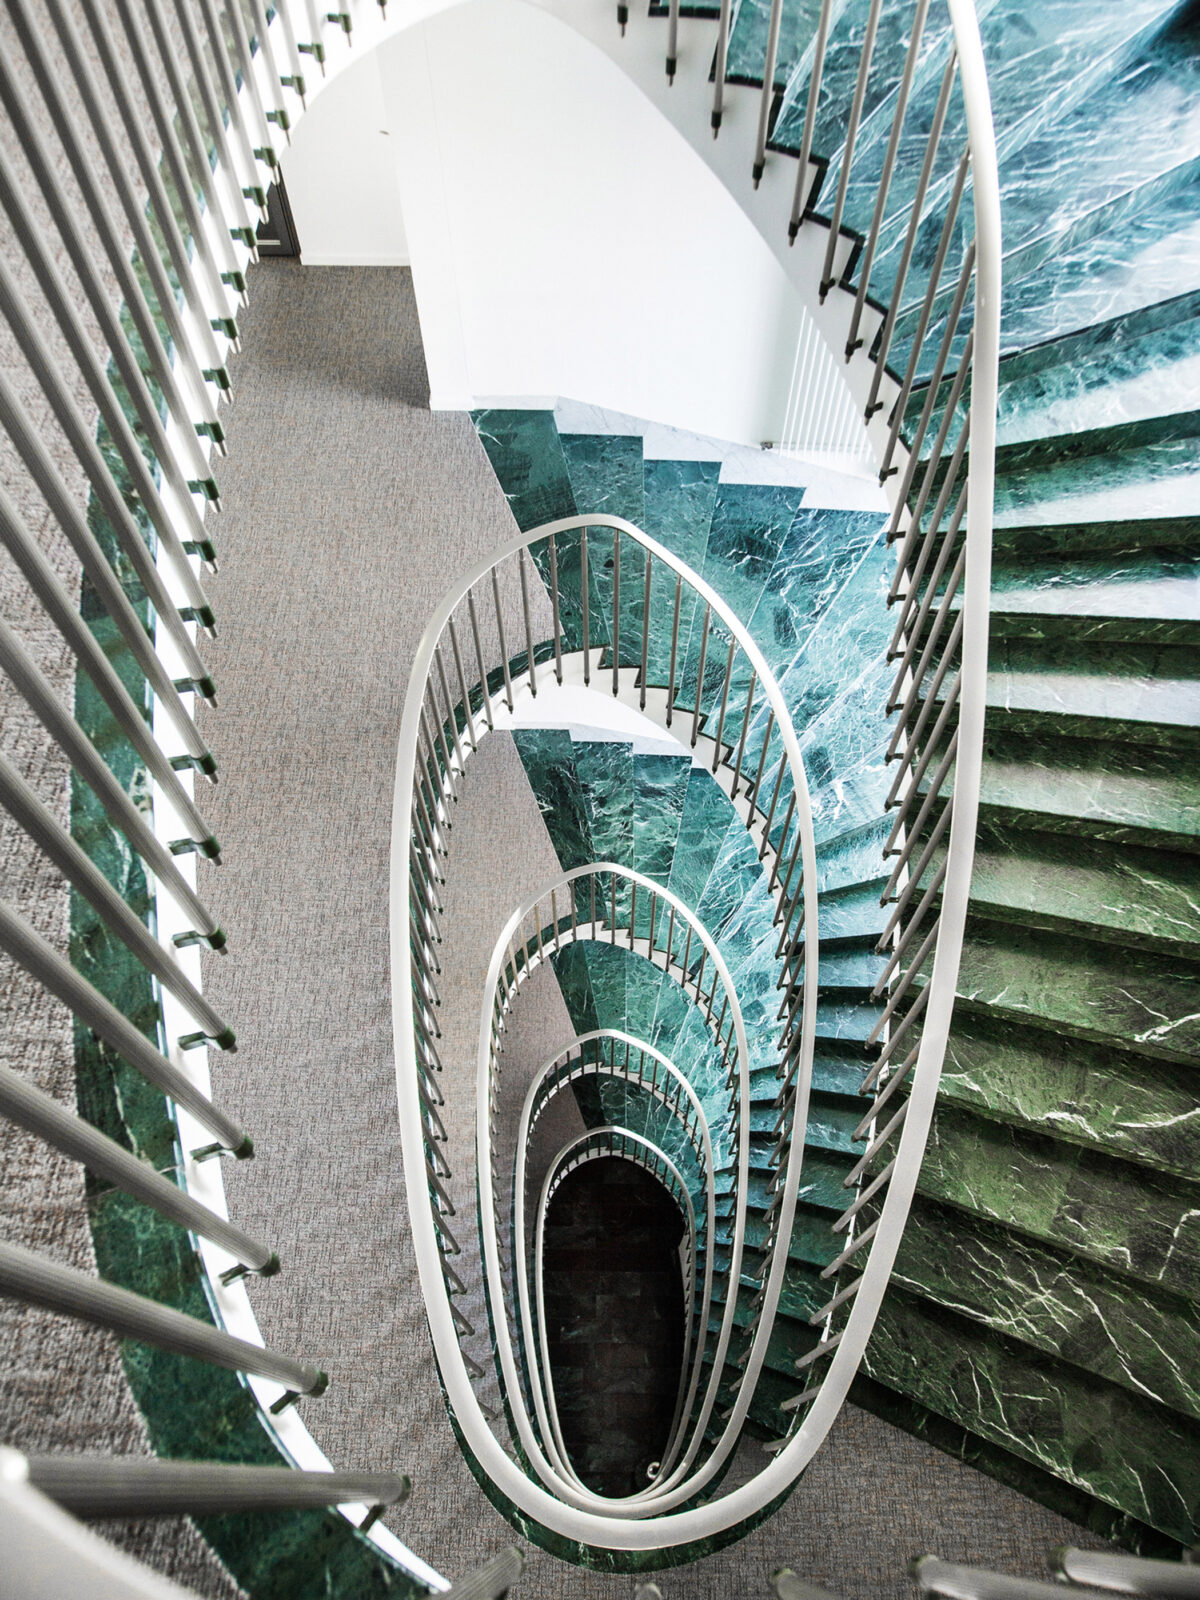 Spiral staircase with white balustrades and steps; below, a patterned emerald floor gives an impression of depth, enhancing the sculptural quality of the architecture.